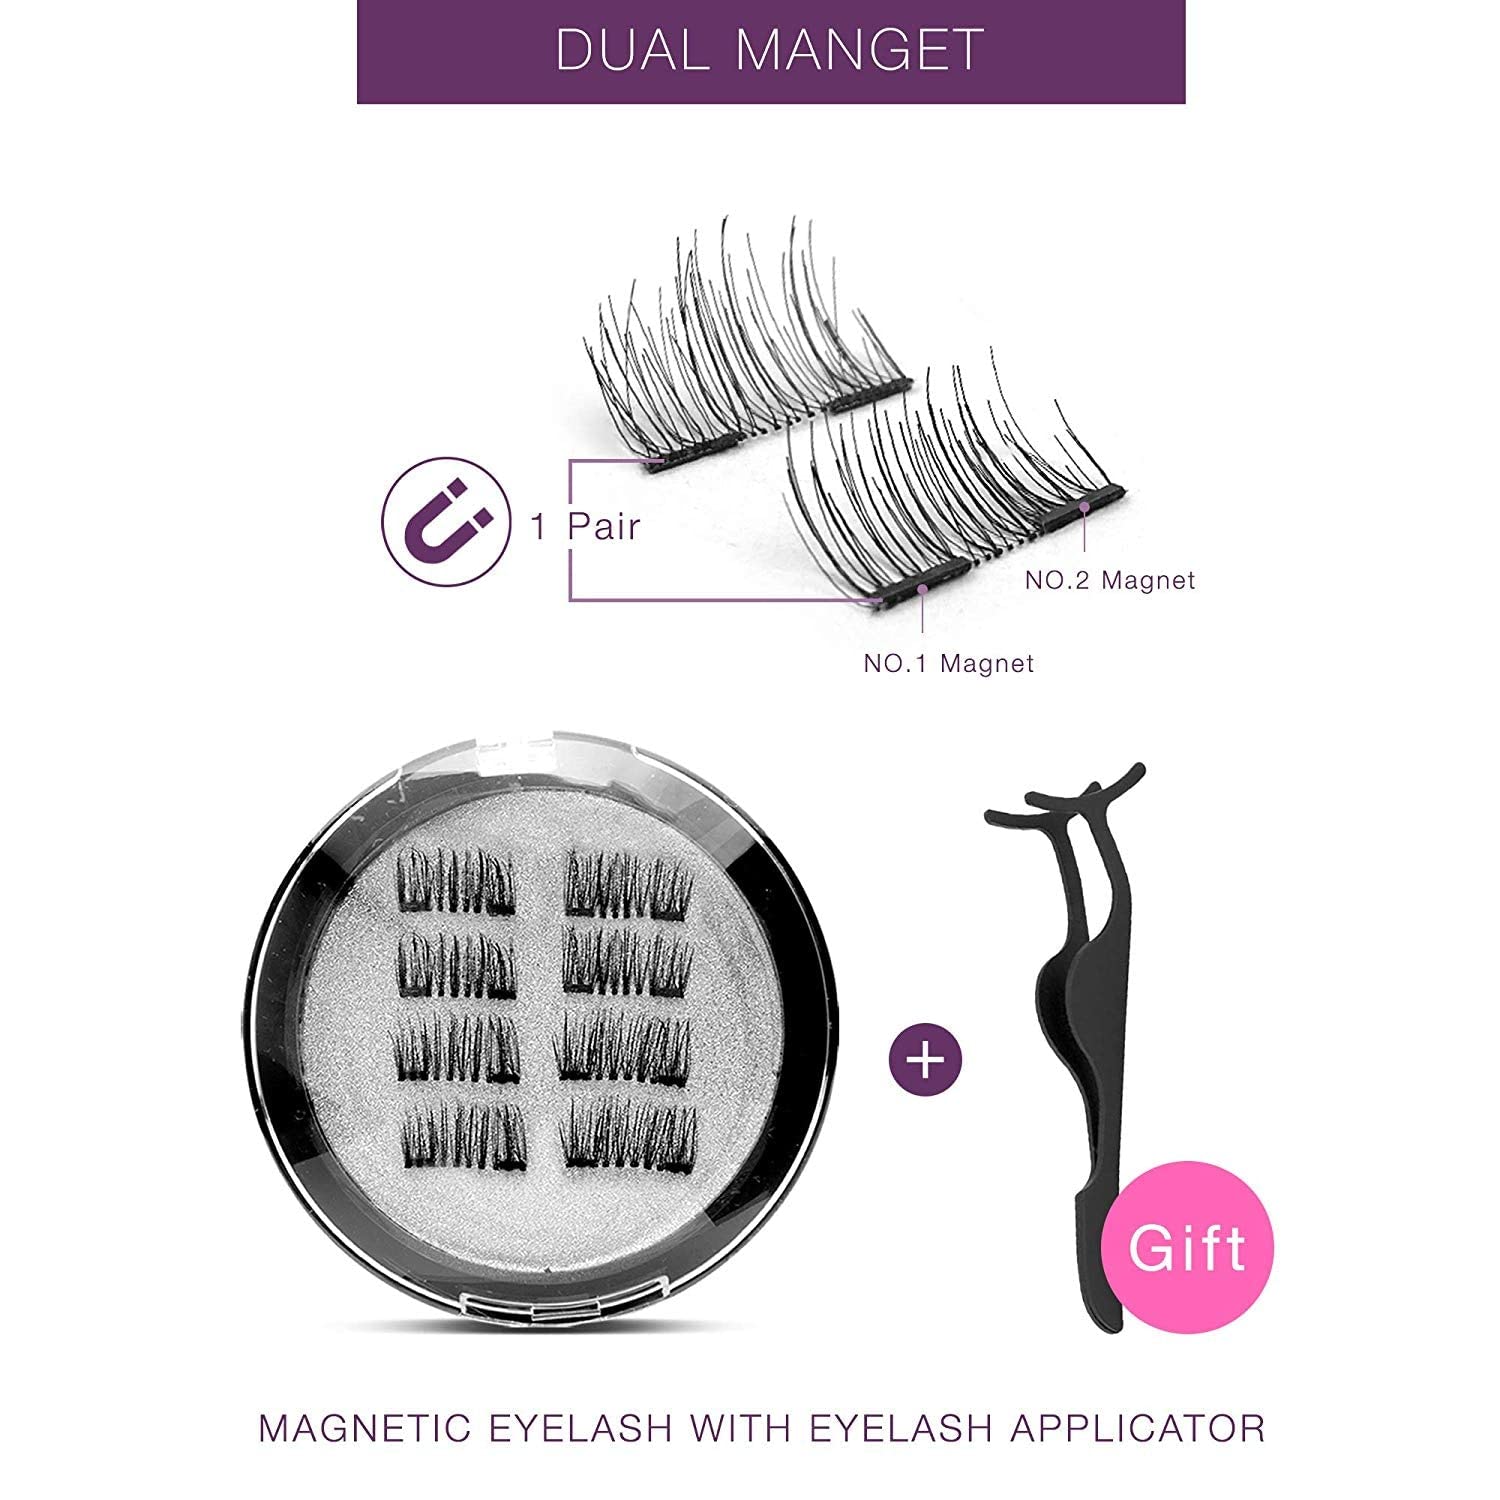 VASSOUL Dual Magnetic Eyelashes, 0.2mm Ultra Thin Magnet, Light weight & Easy to Wear, Best 3D Reusable Eyelashes with Applicator (8 PC with Tweezers)